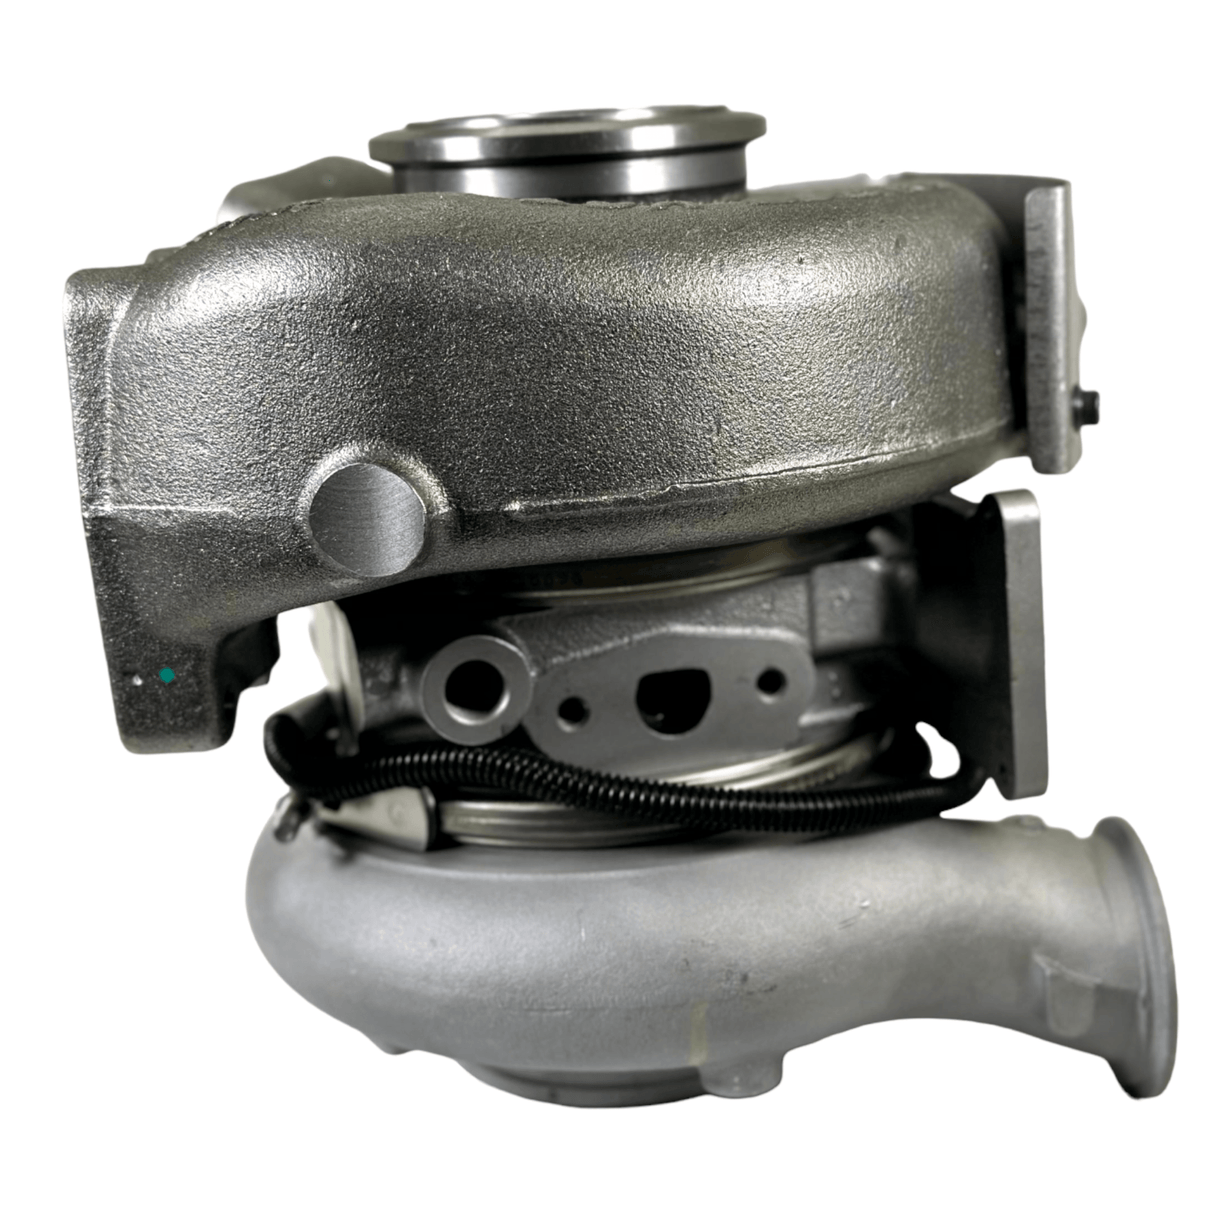 3798378Rx Genuine Cummins Turbocharger Kit He351Ve For Isb 6.7L - Truck To Trailer